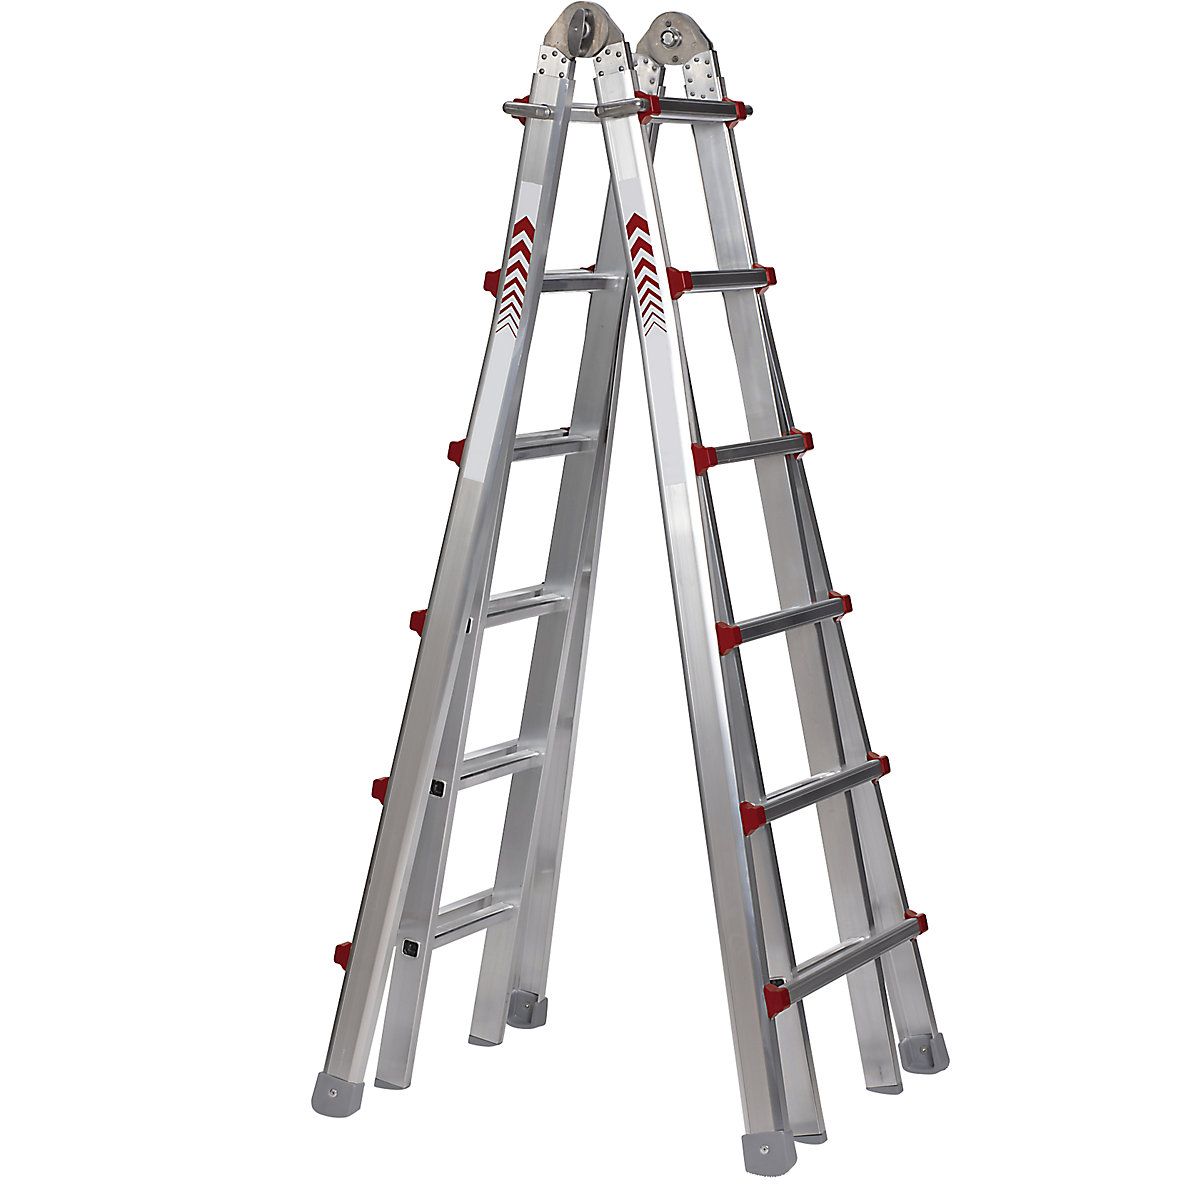 Telescopic folding ladder, stepladder, lean-to ladder and stair ladder in one, 4 x 6 rungs-15